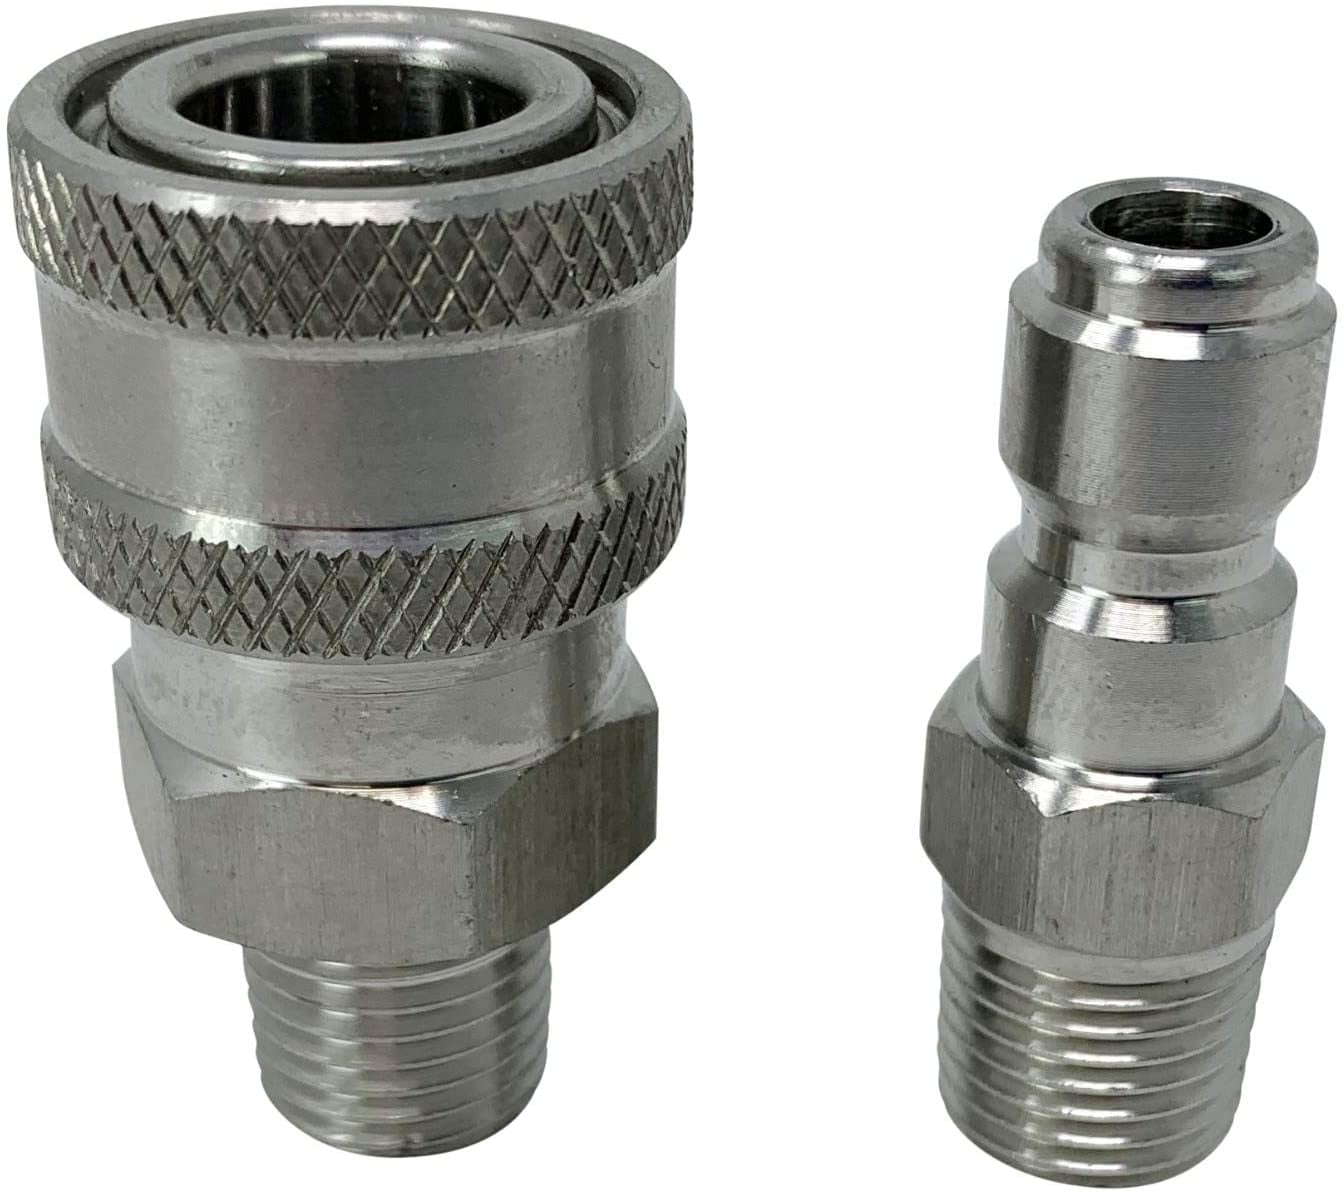 NPT 3/8 Quick Connect Fitting Coupling Connector Adapter Set for Pressure Washer 